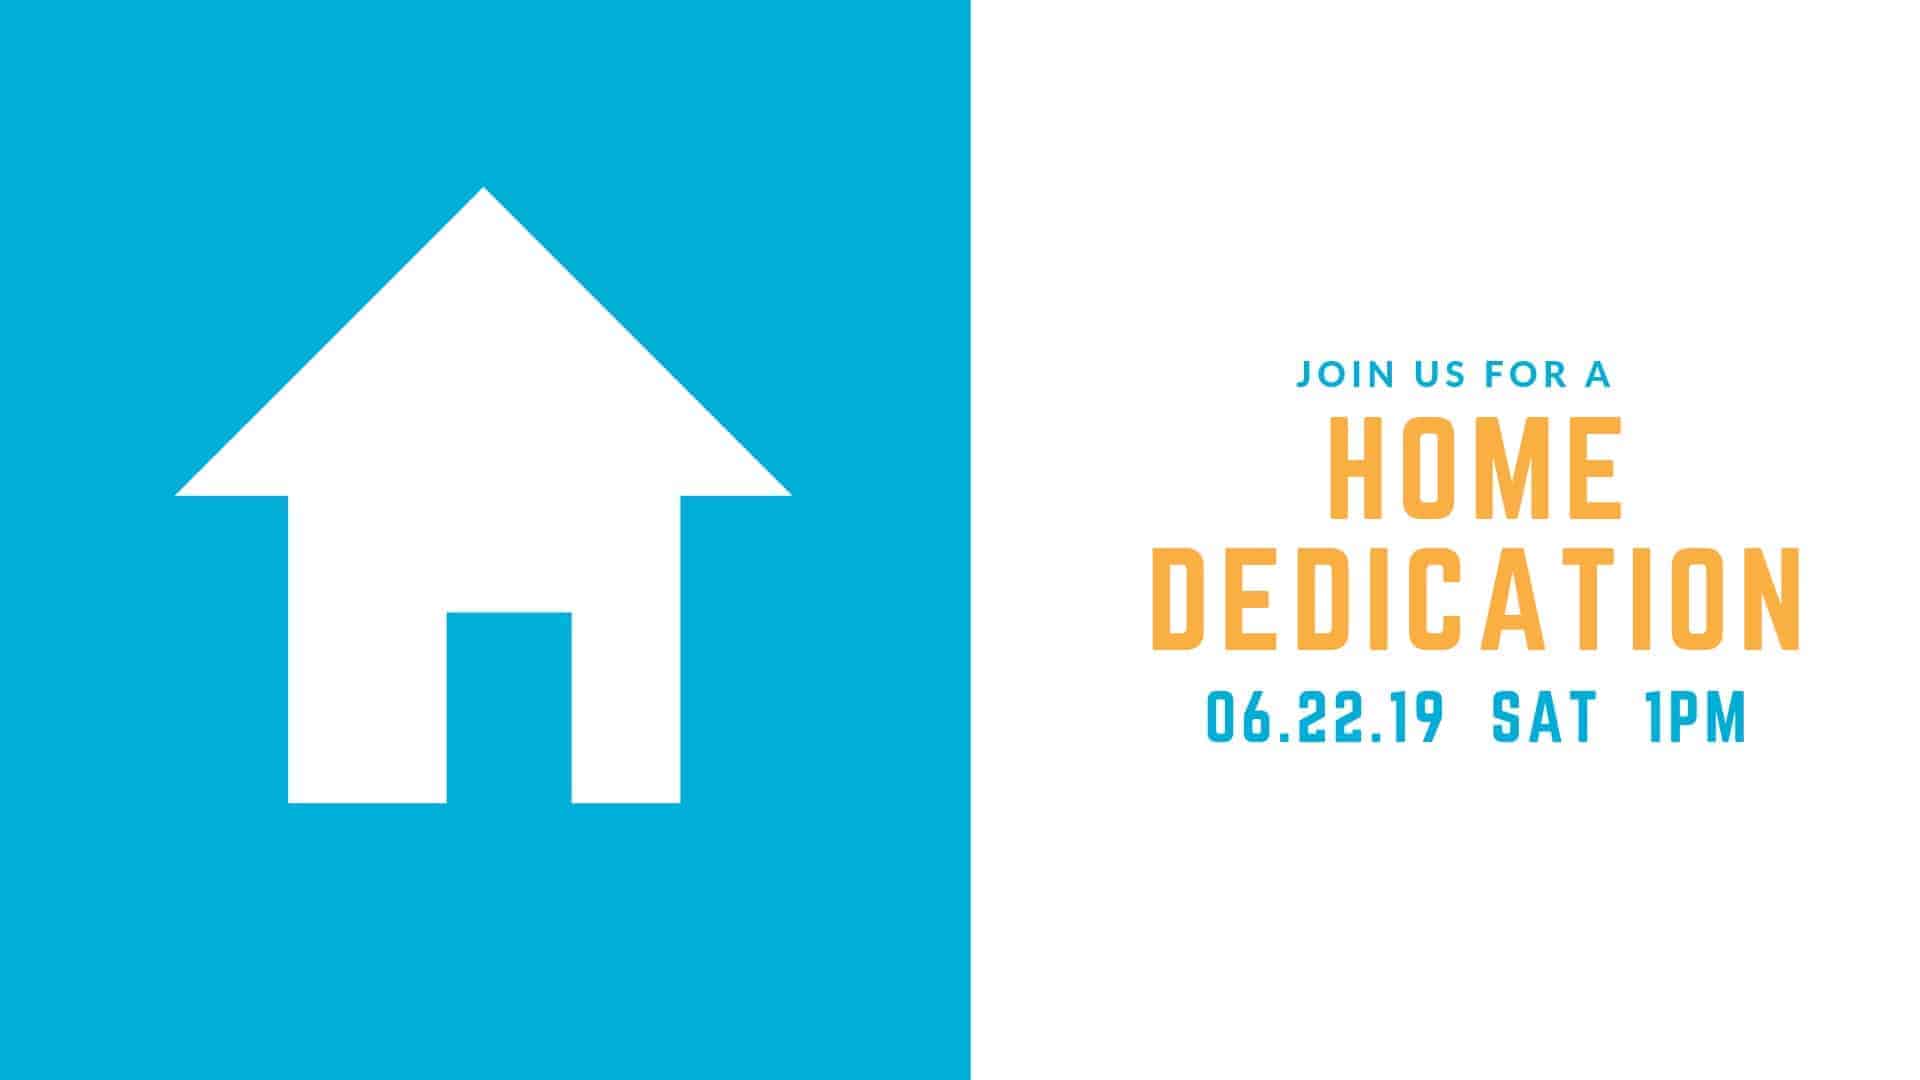 Join us for a home dedication - June, 22, 2019 at 1pm